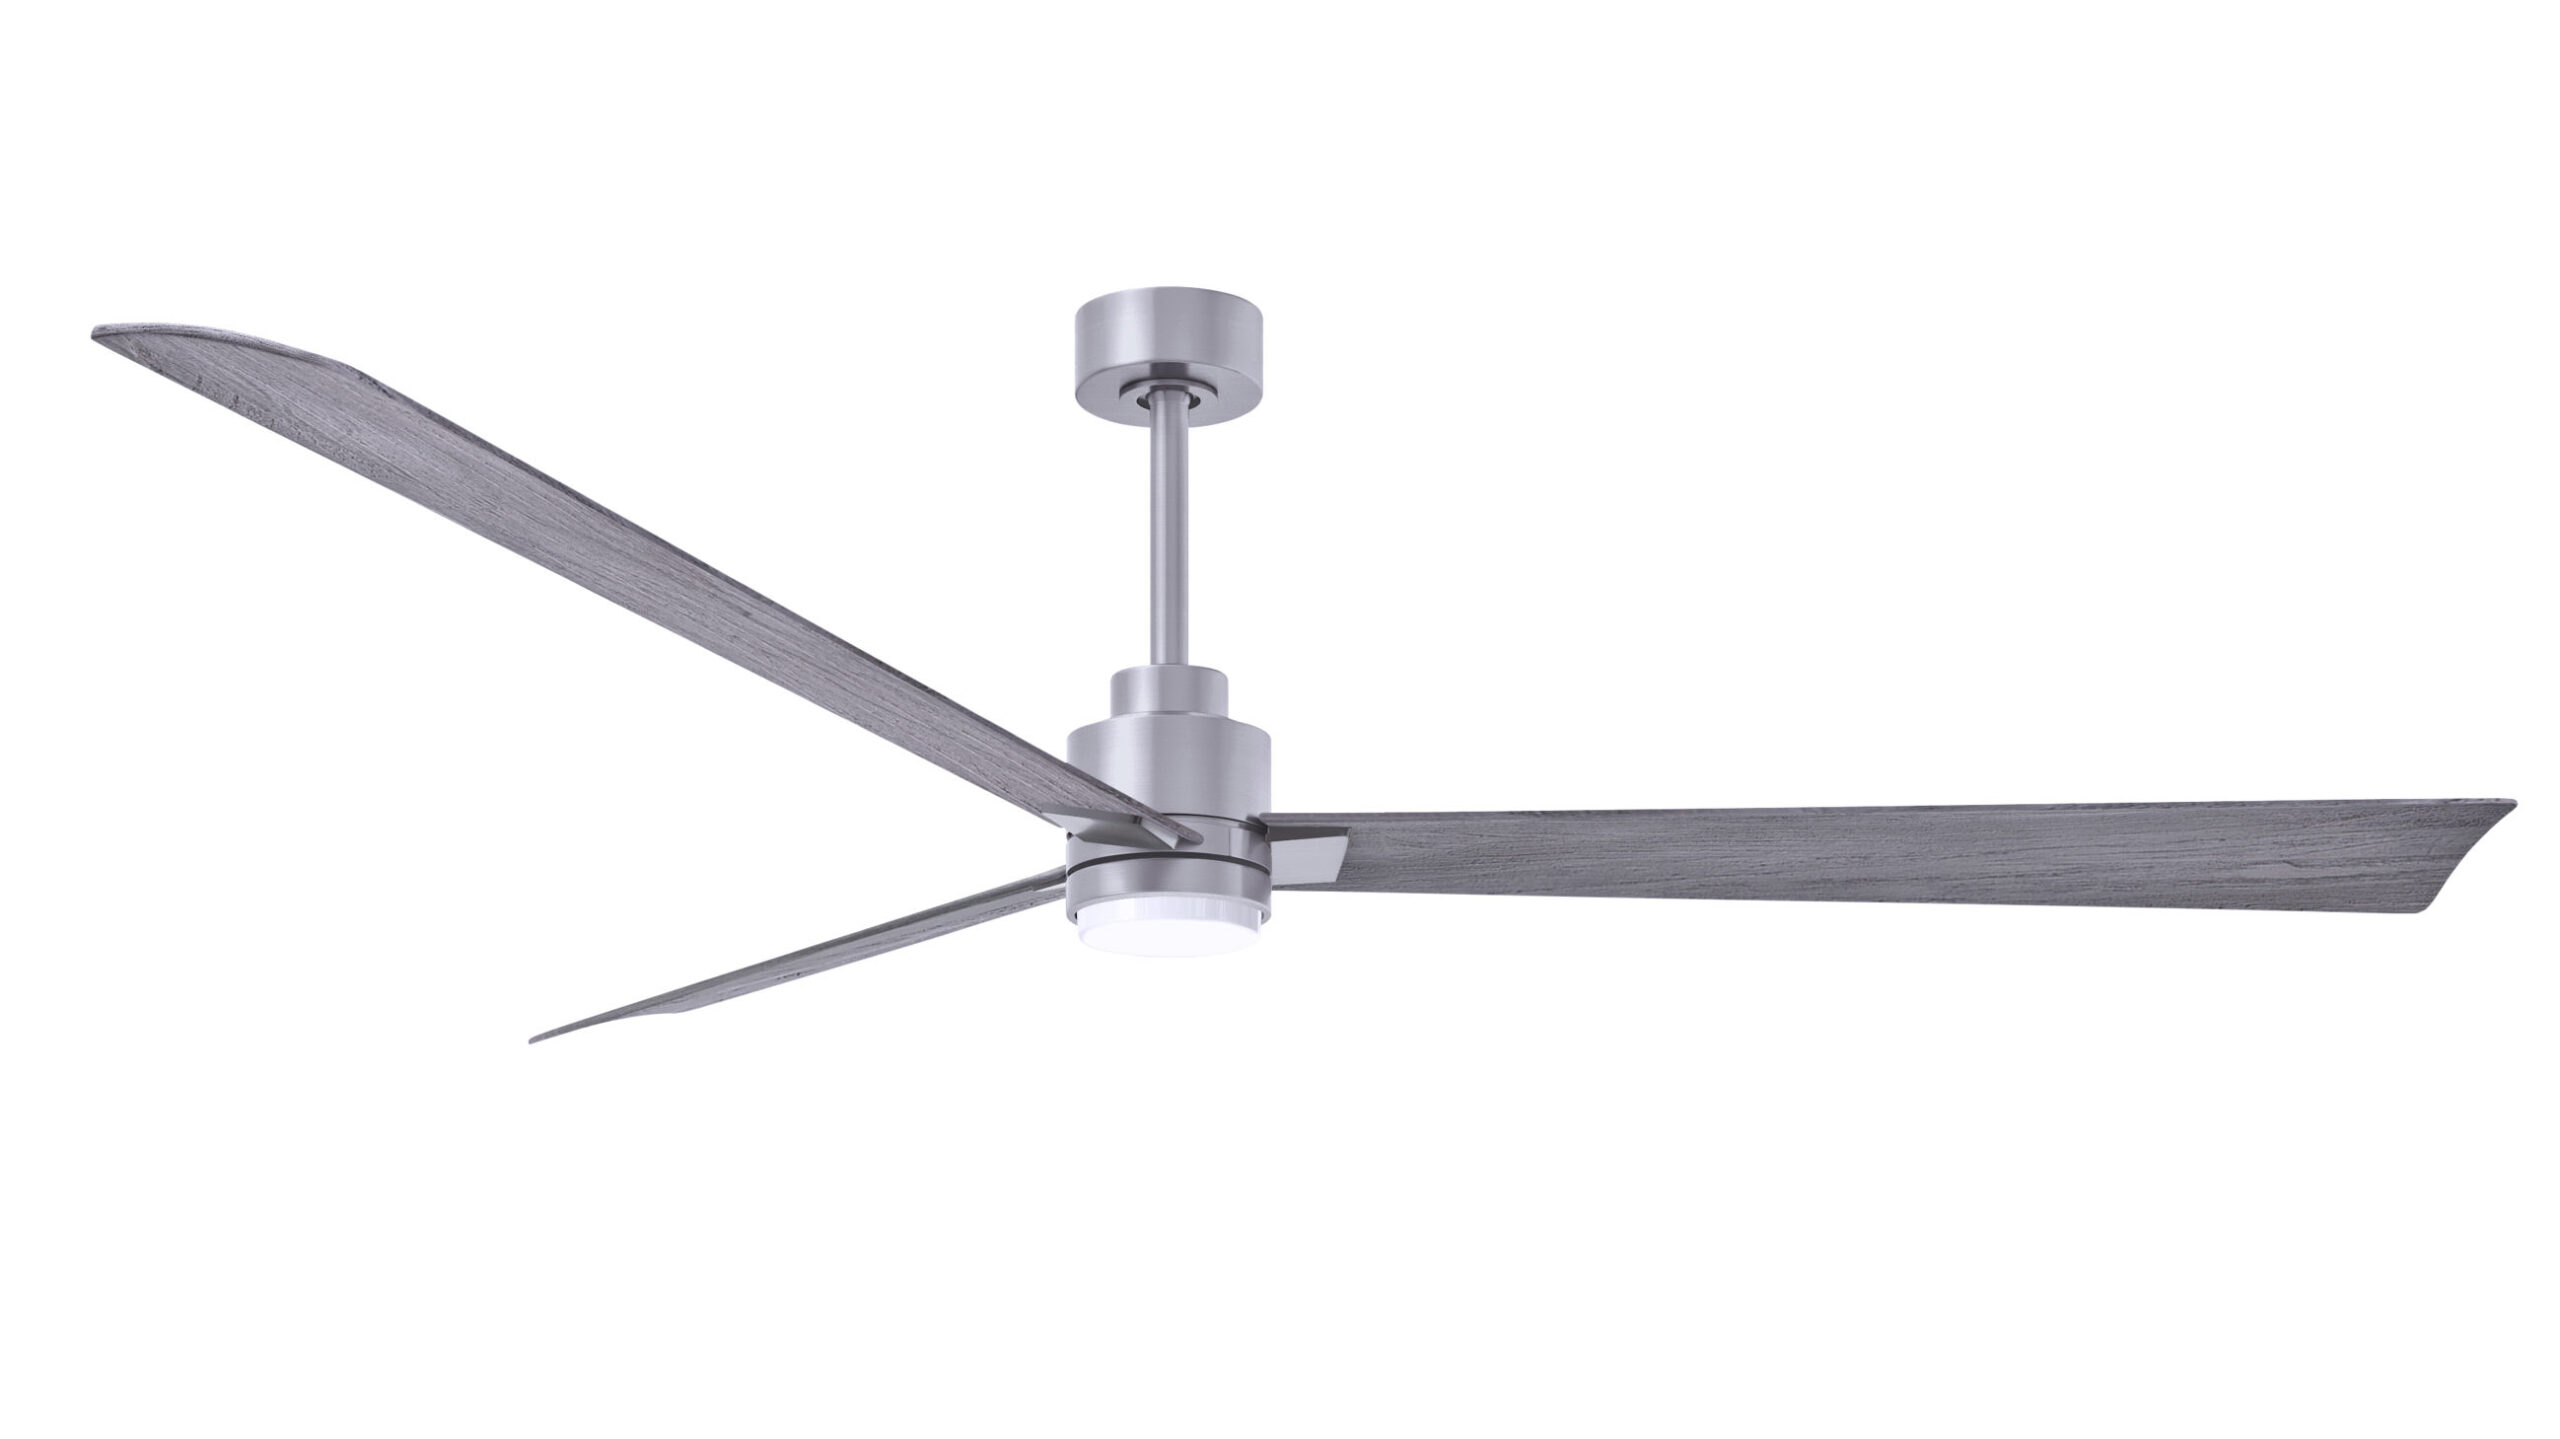 Alessandra-LK ceiling fan in brushed nickel finish with 72